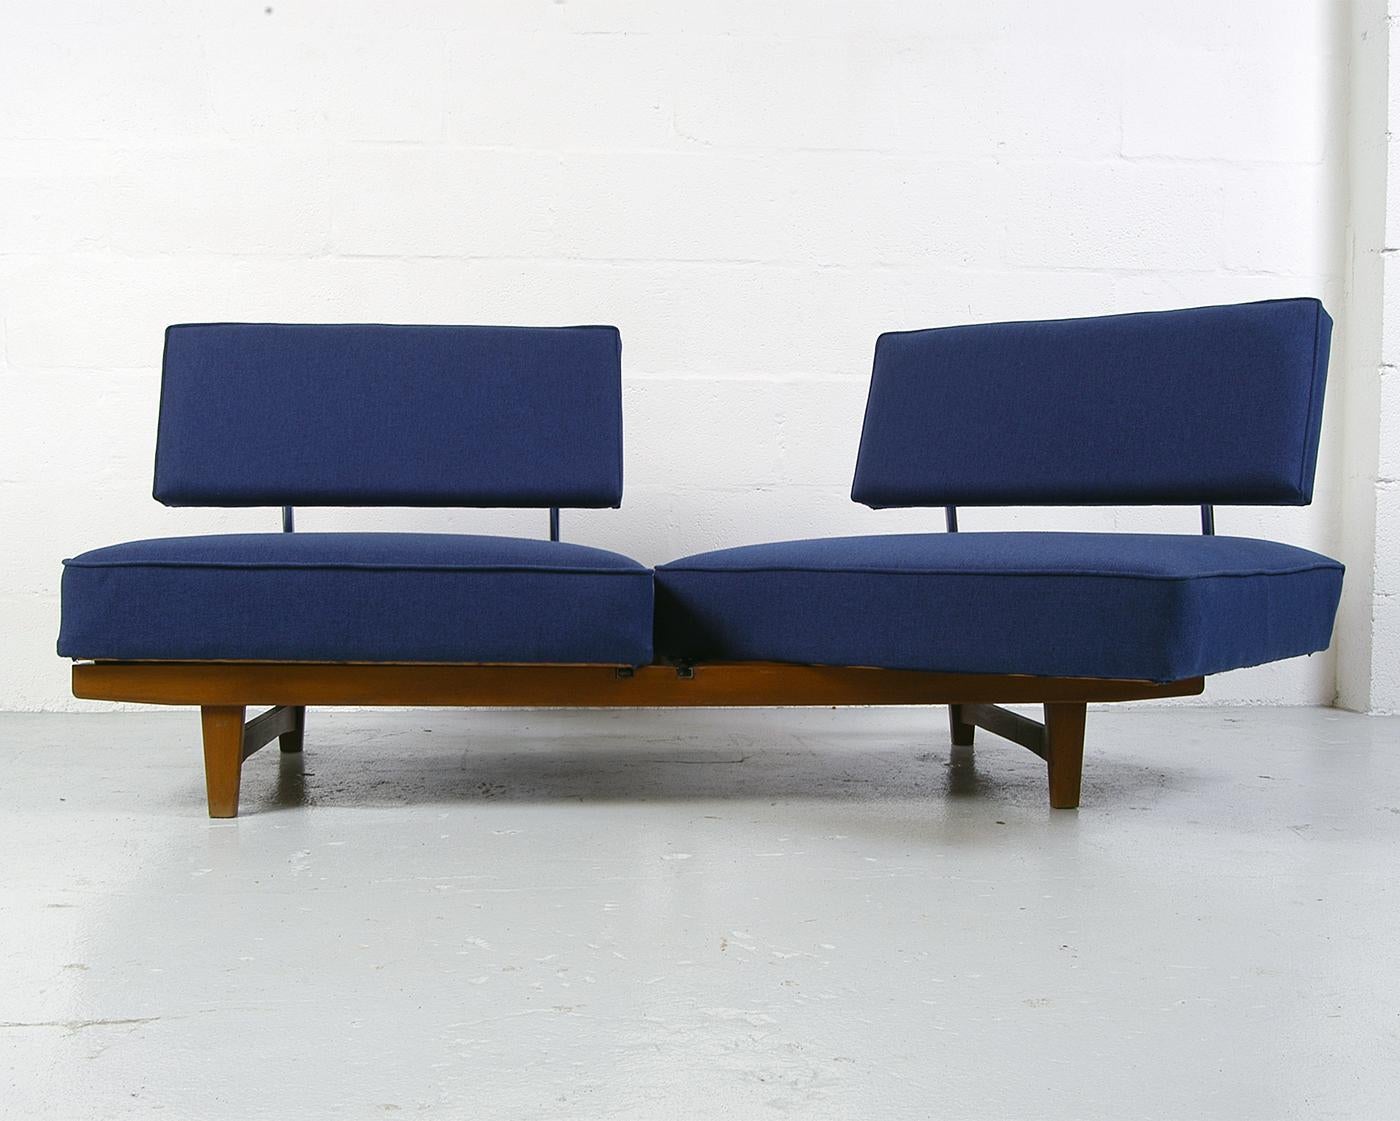 German Vintage 1950s Mid-Century Modern Knoll 'Stella’ Convertible Daybed Sofa Couch